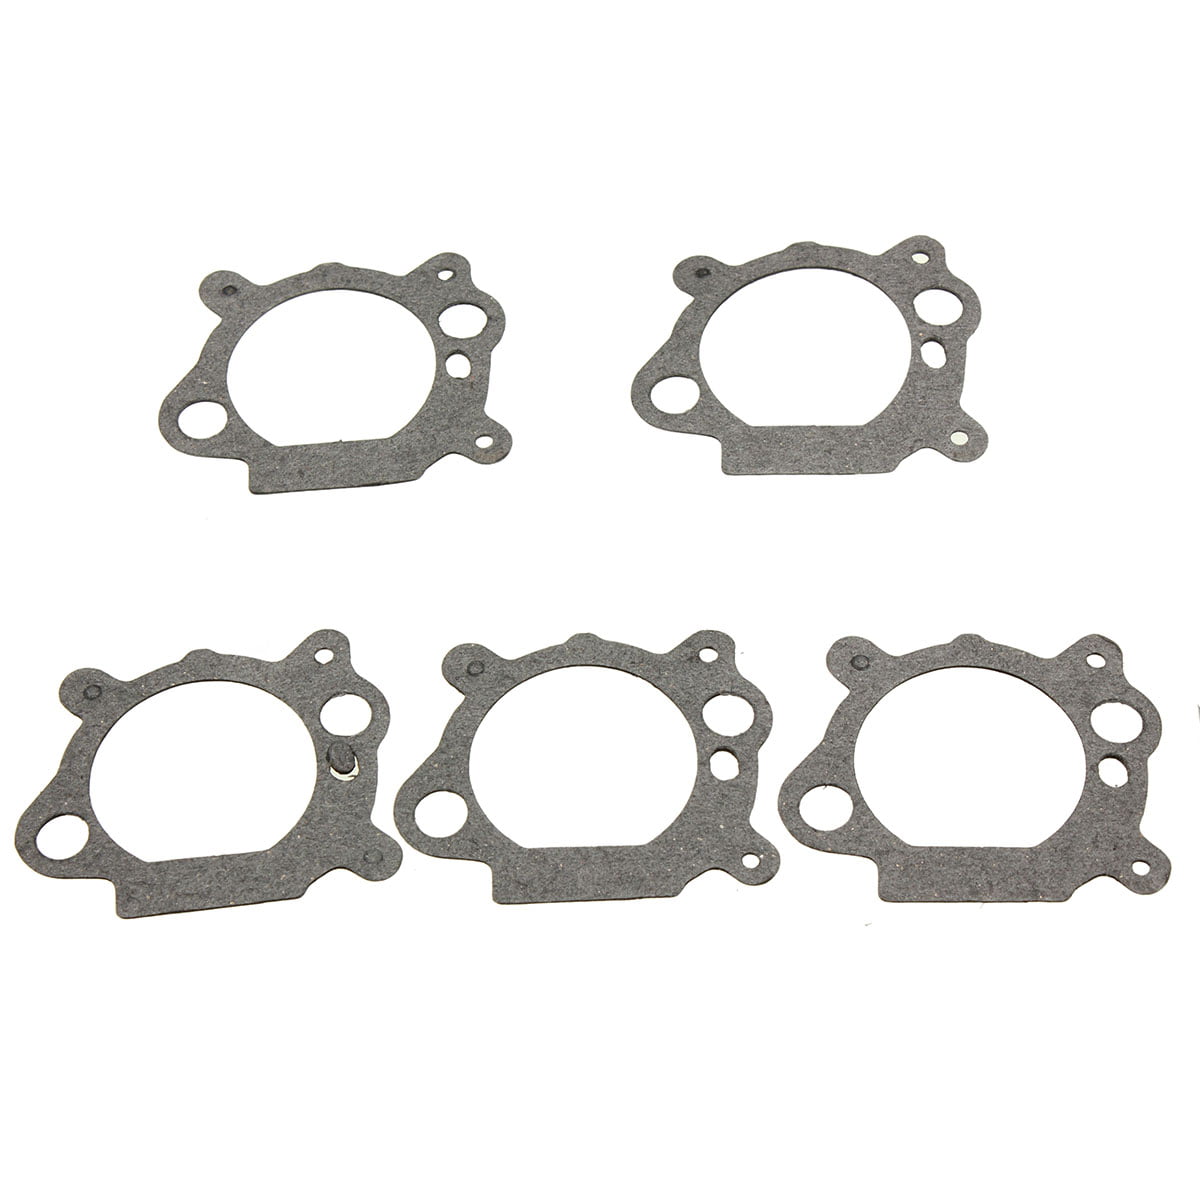 272653S & 795629. Briggs & Stratton Nos Air Cleaner Gasket replaces 2pcs. 